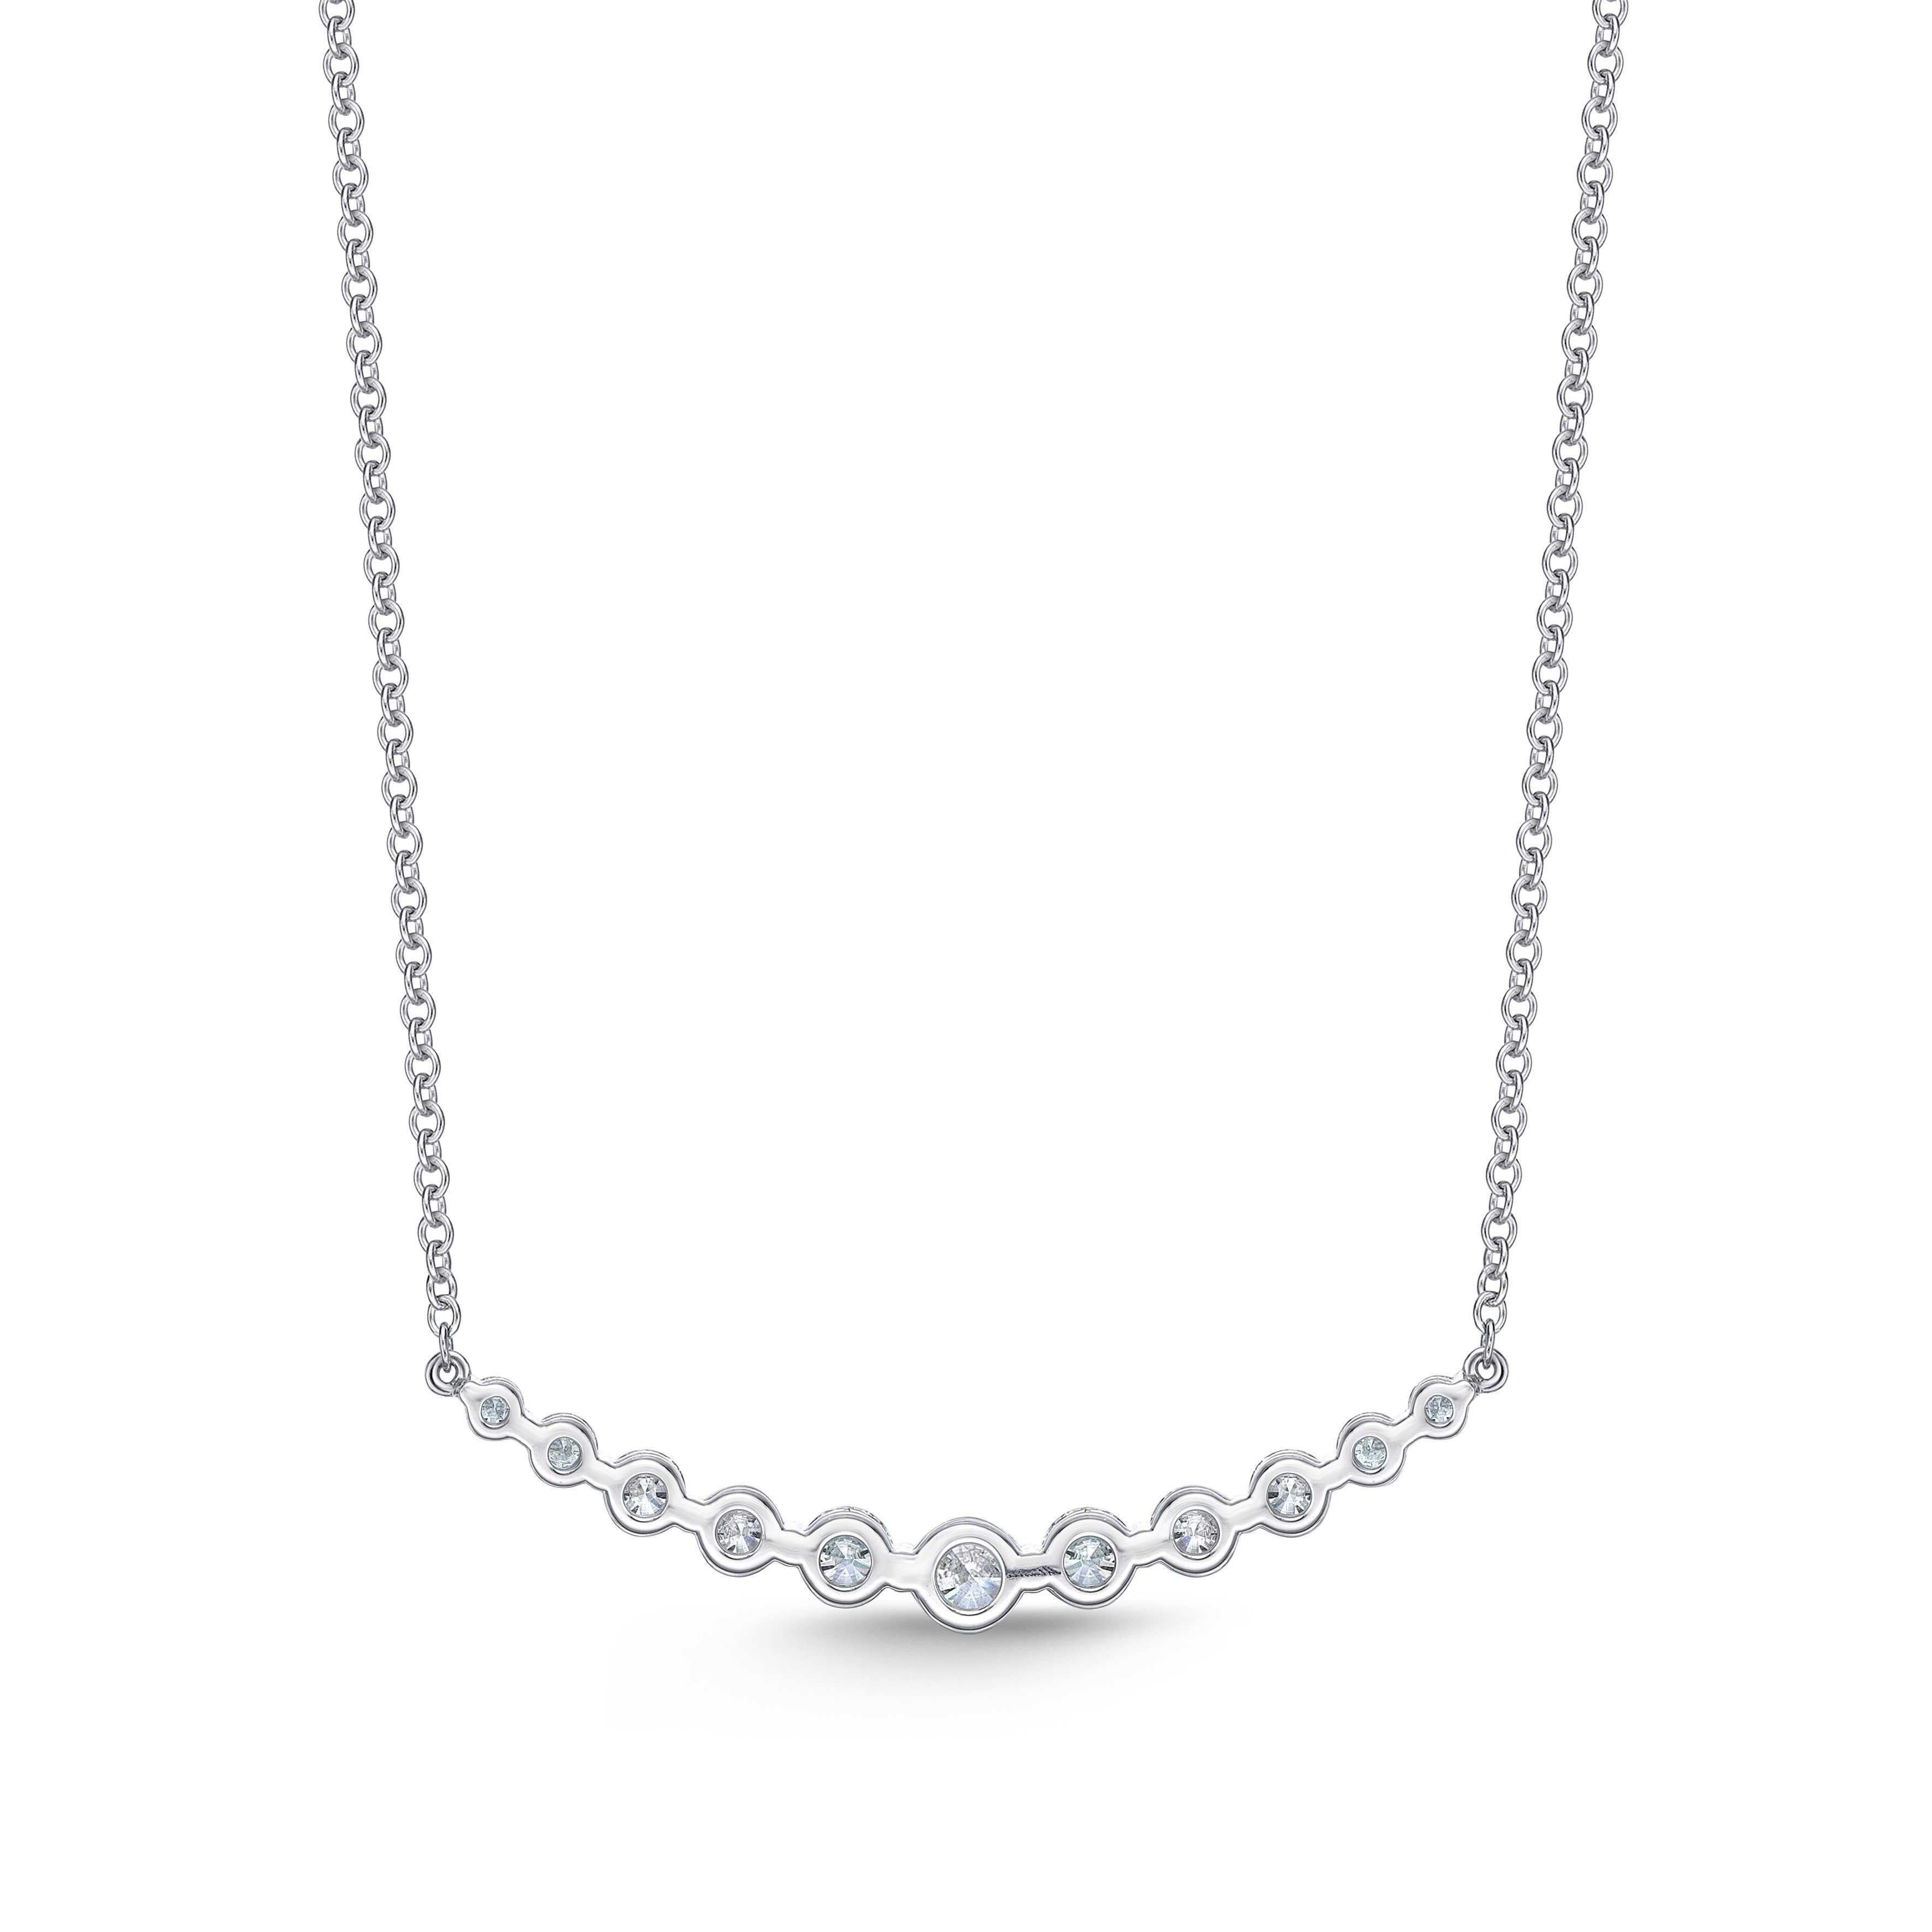 Modern Memoire Diamond Classic Smile Necklace 1ct. TW. Set In 18k White Gold For Sale